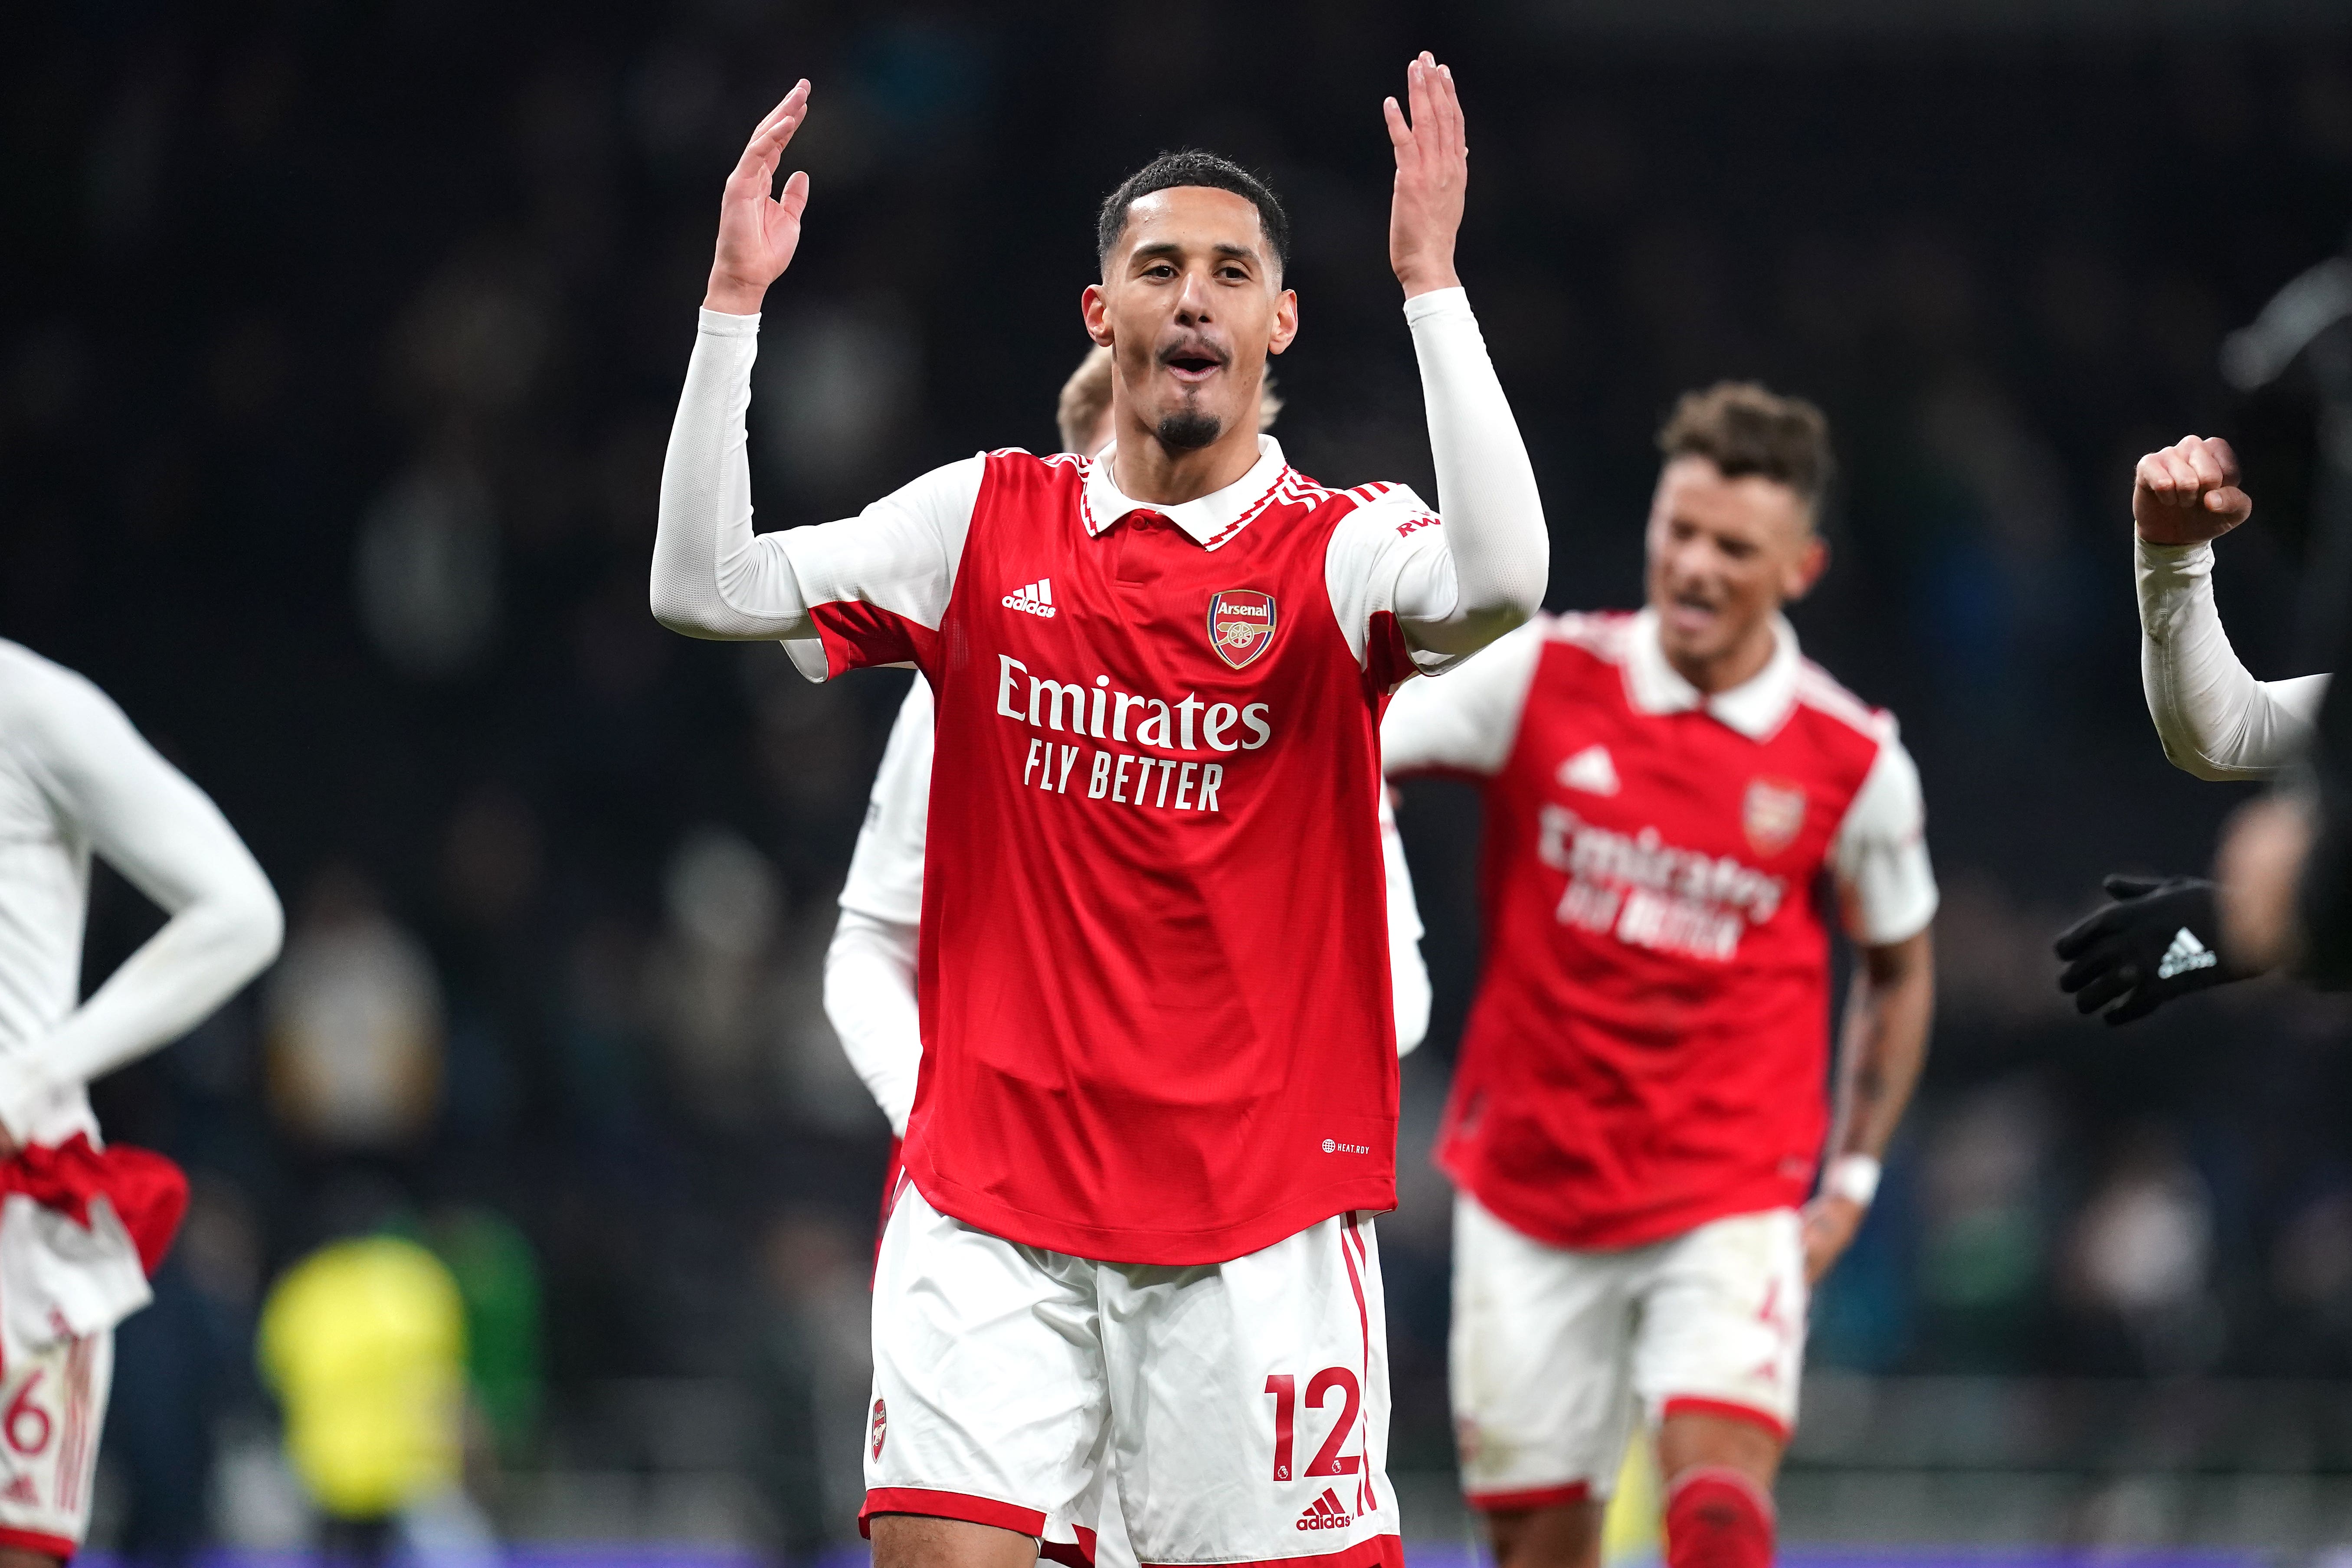 Arsenal defender William Saliba 'really happy' to be back after injury